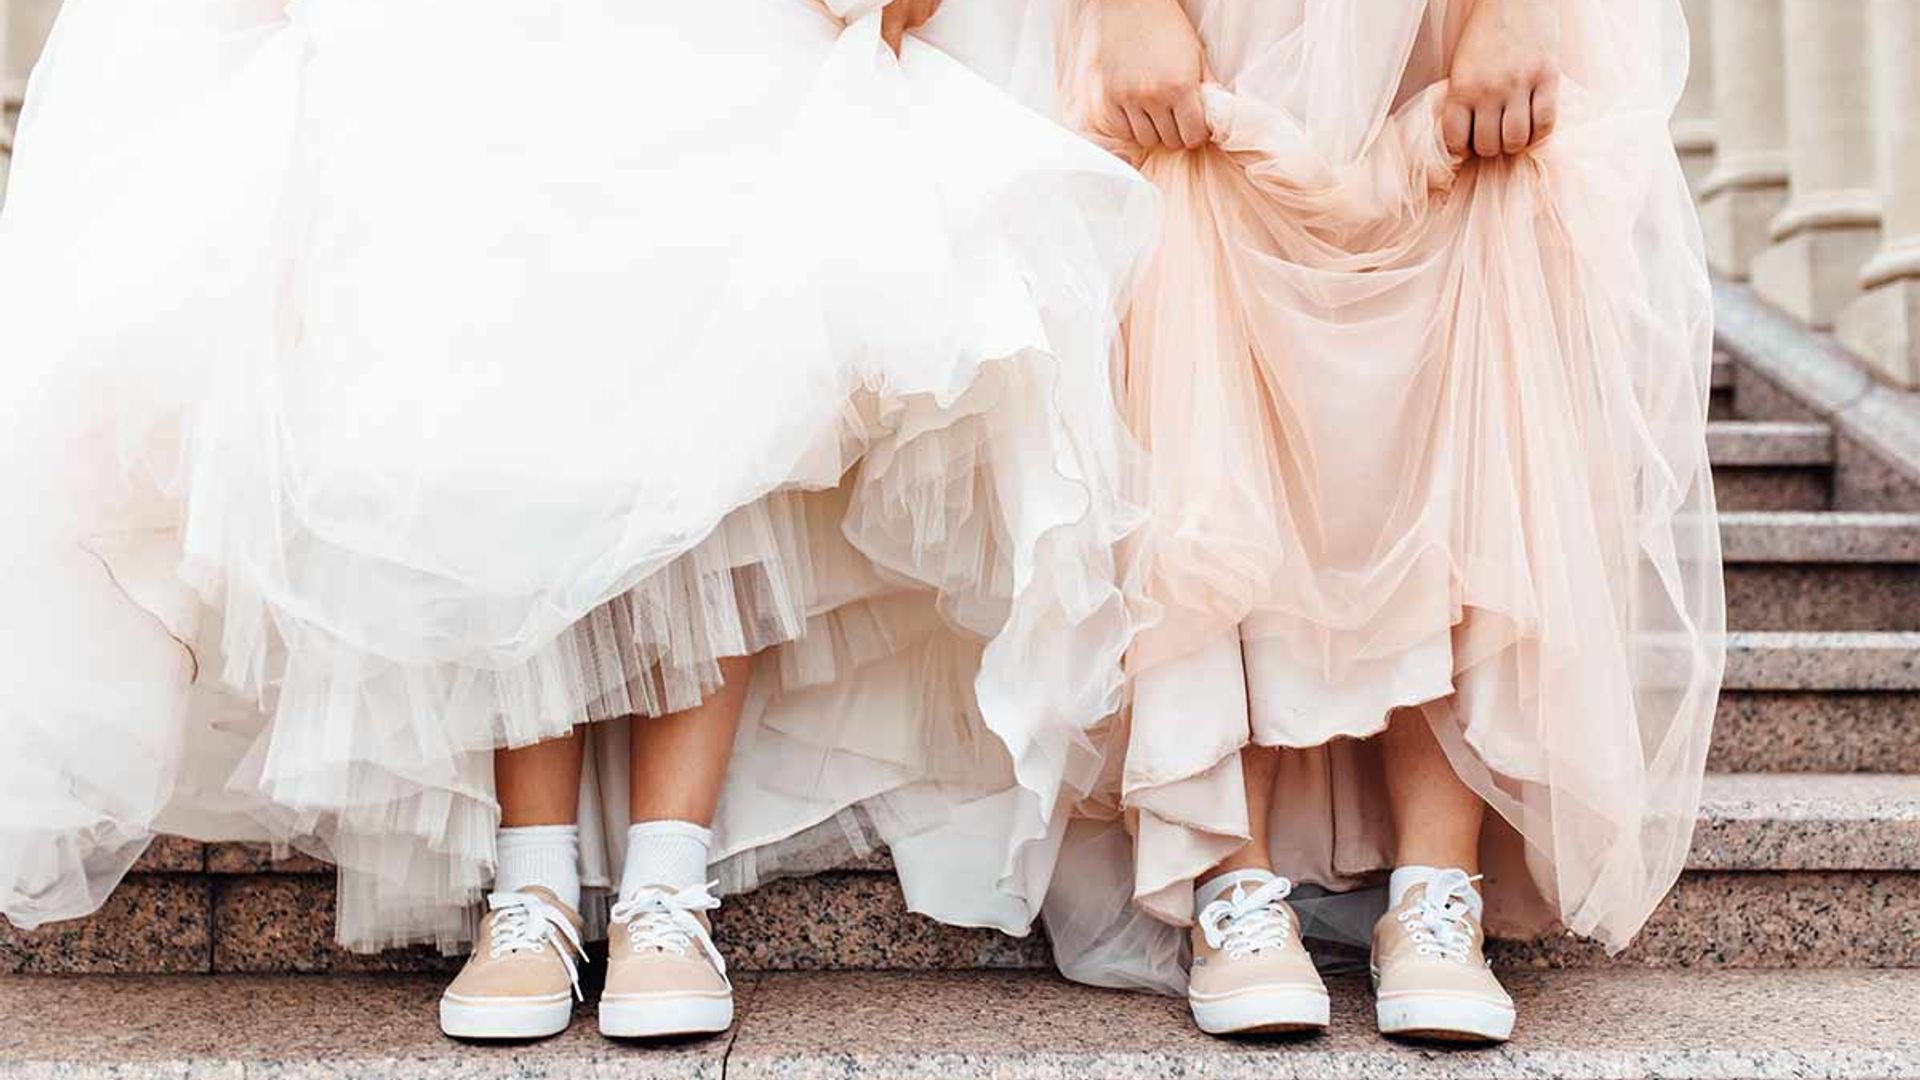 Converse is selling wedding trainers 